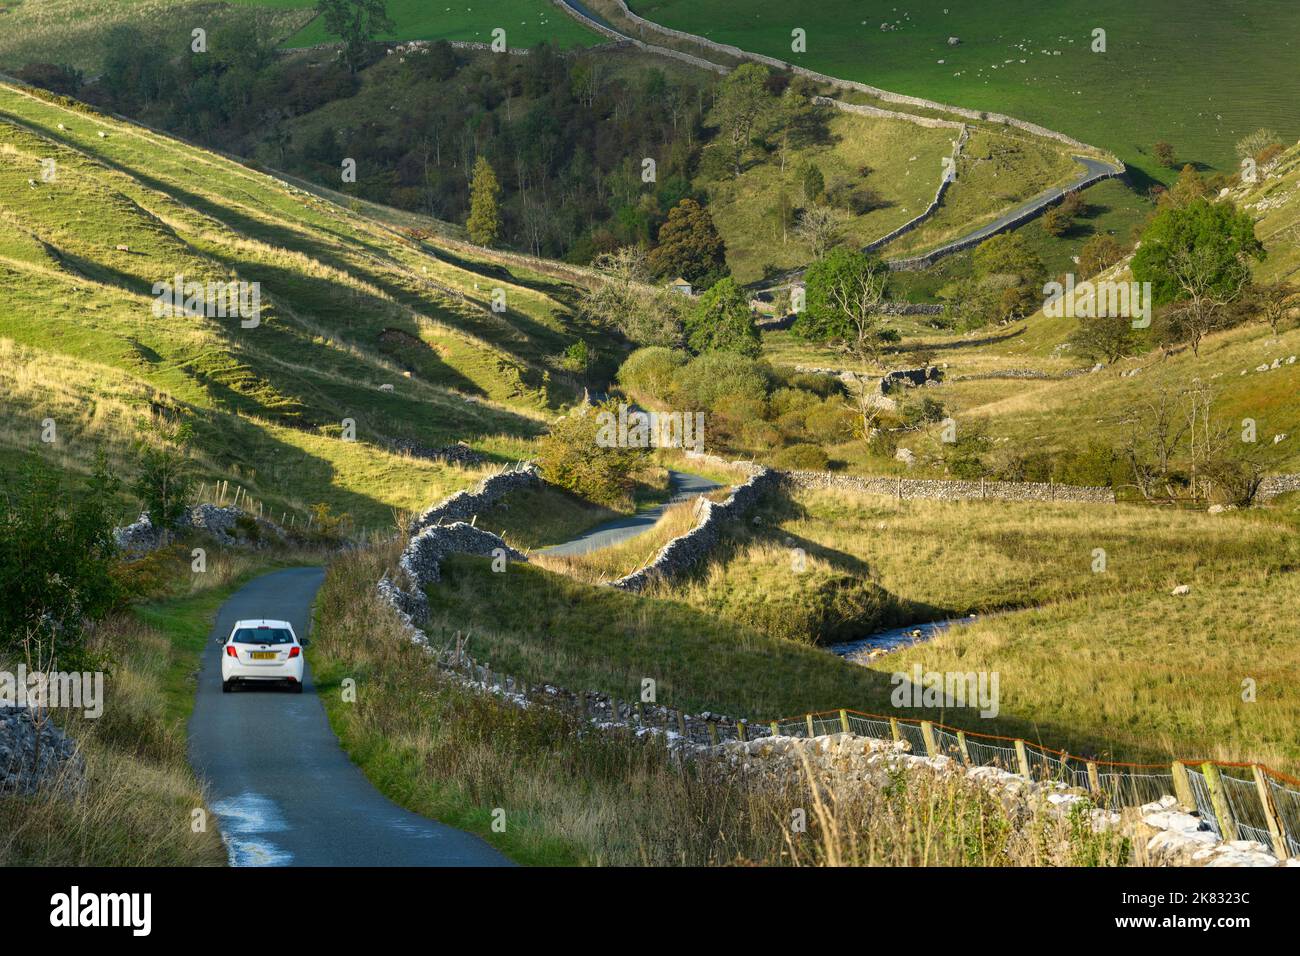 1 car on quiet twisting undulating country lane (scenic sunlit hilly countryside, steep climb, stream) - near Kettlewell, Yorkshire Dales, England UK. Stock Photo